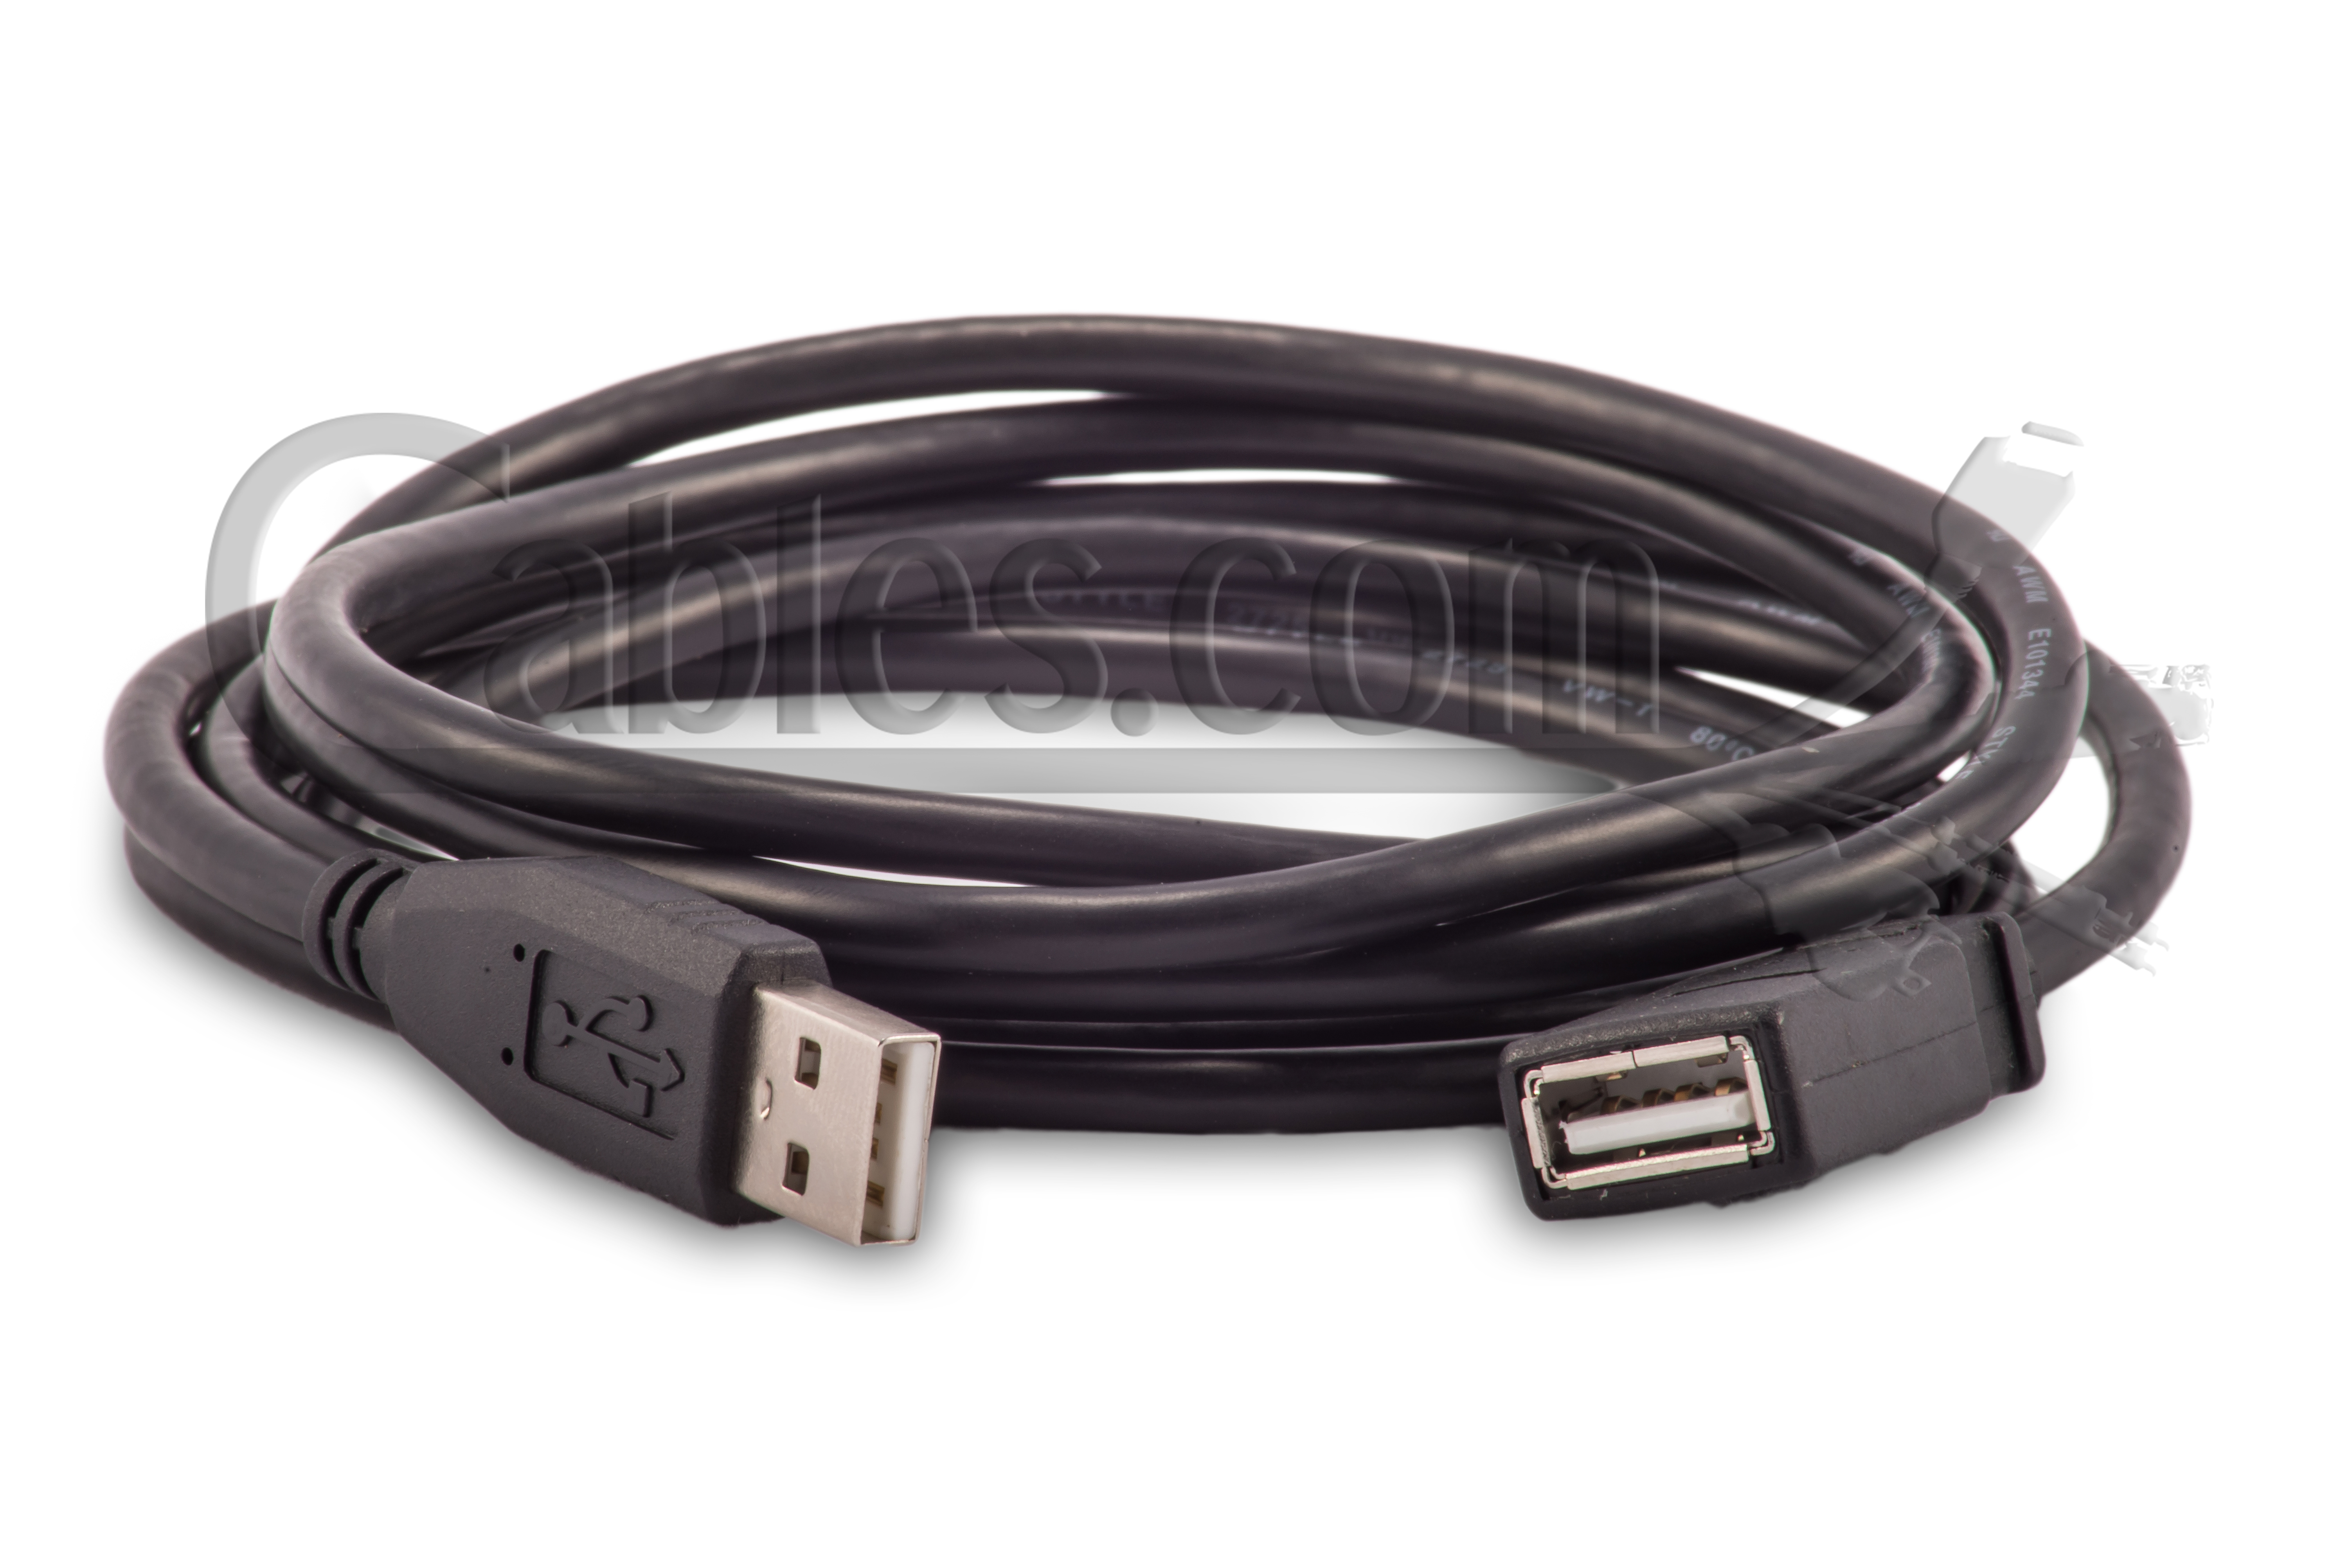 usb male to female cable